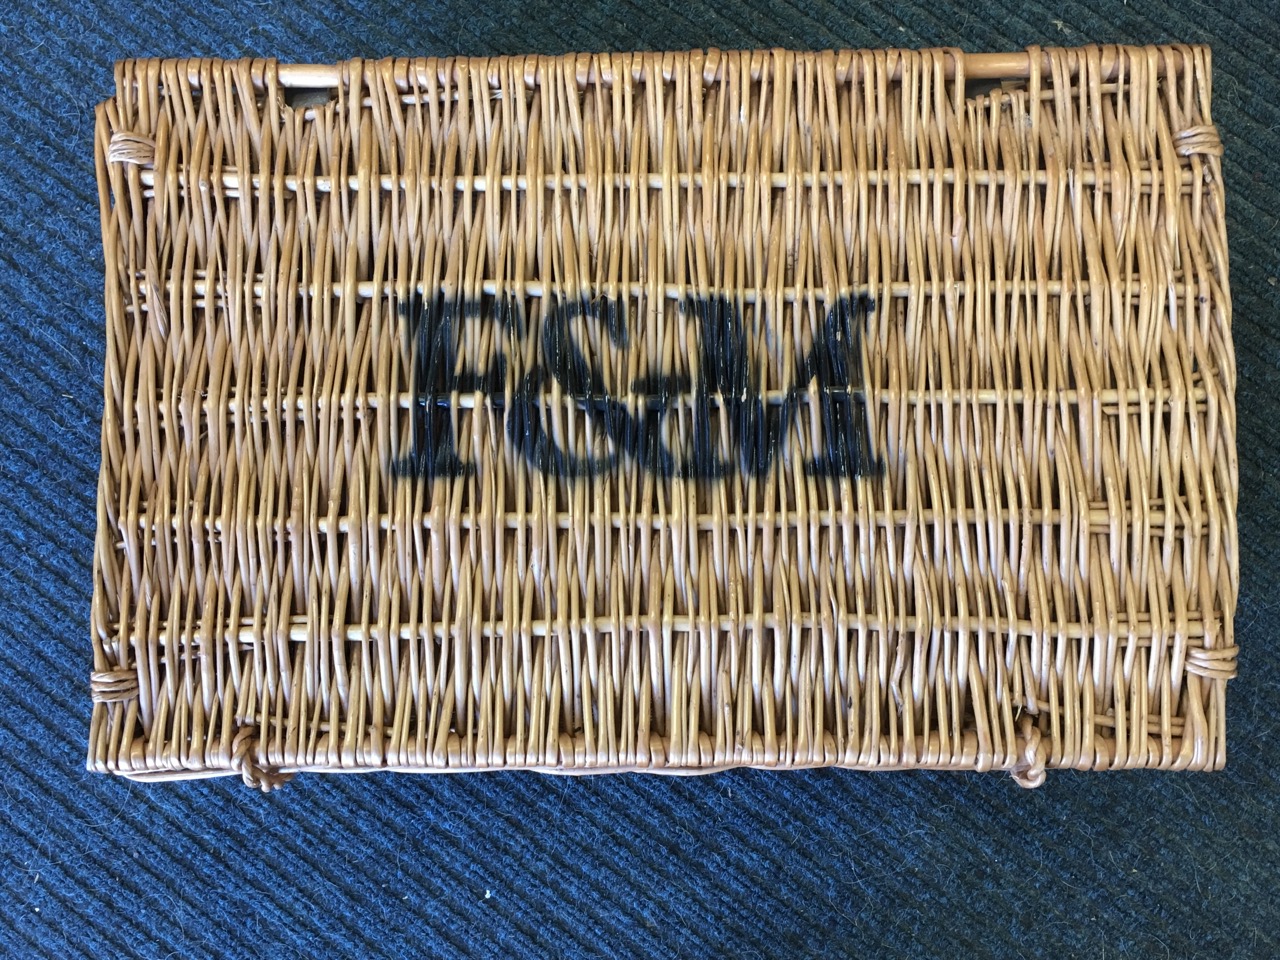 A Fortnum & Mason cane basket with handle & leather straps. - Image 2 of 3